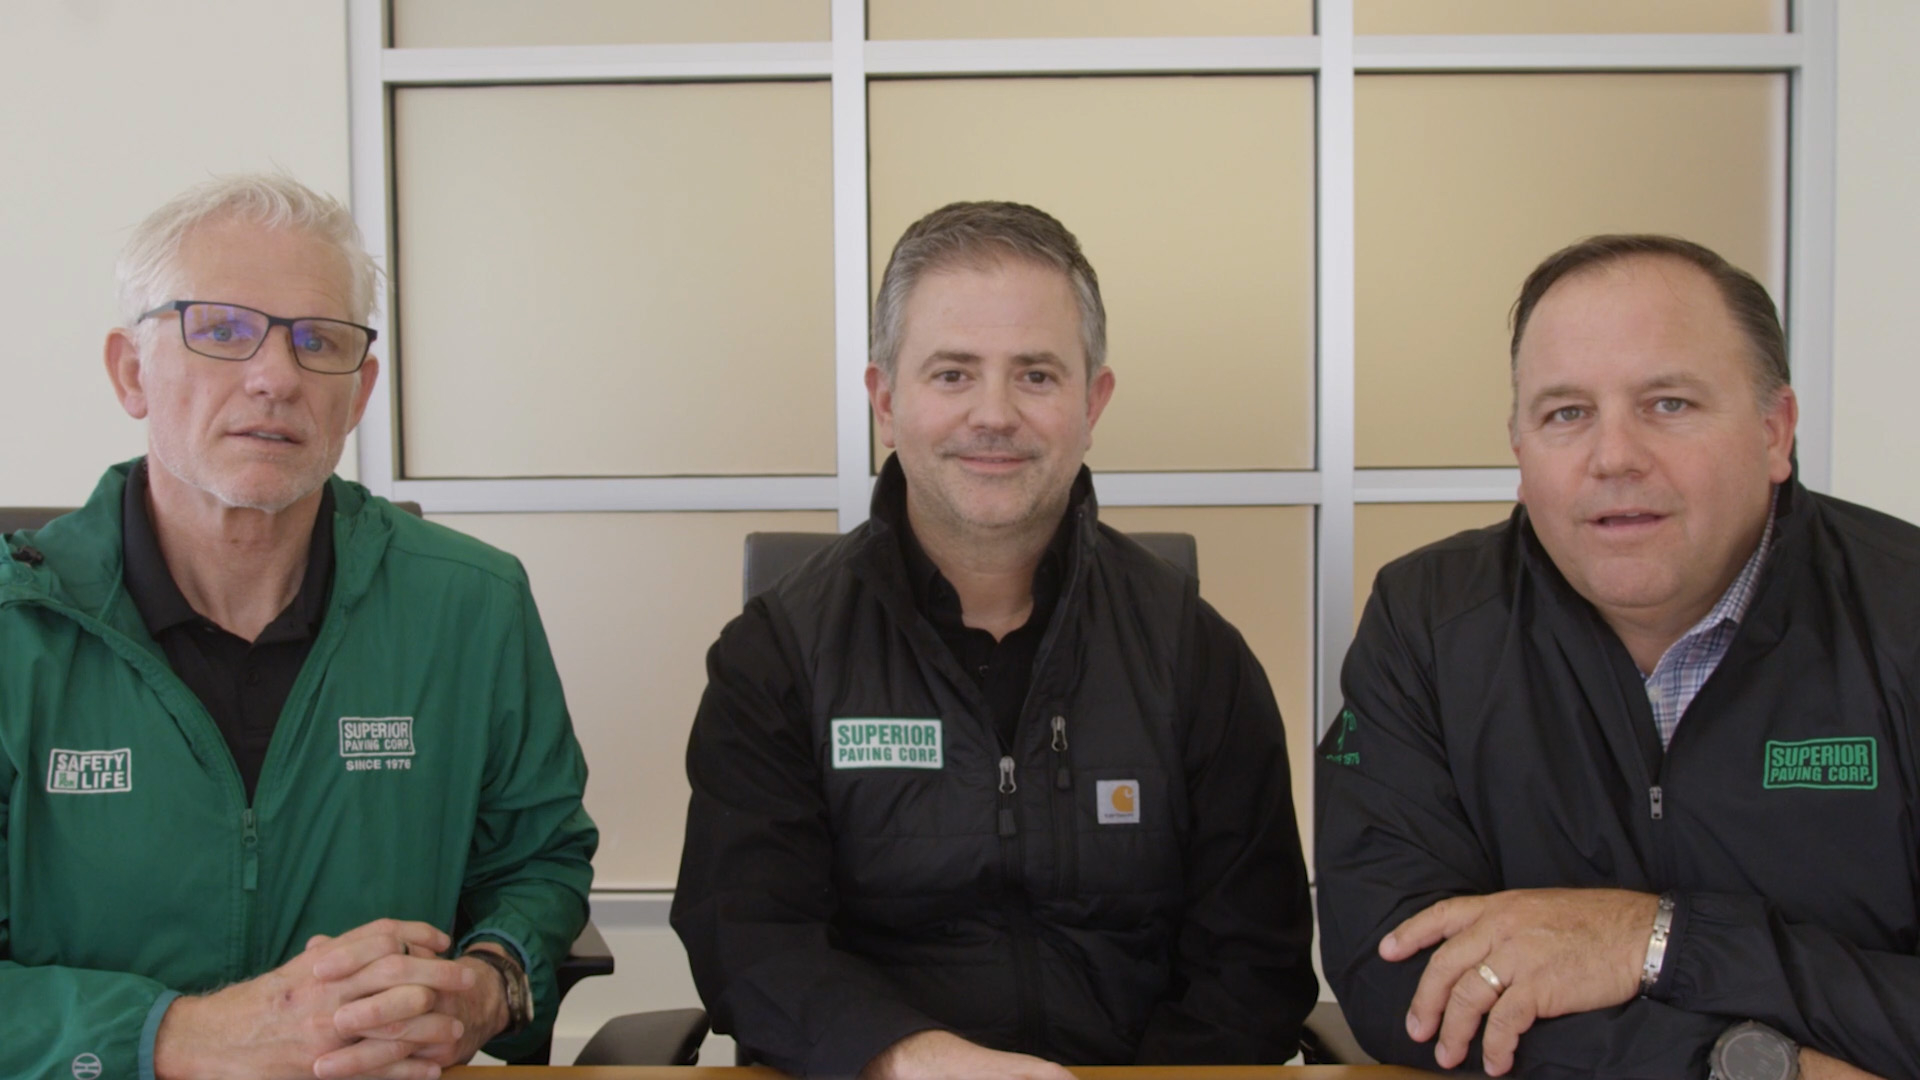 Frank Surface, David White and Jim Mitchell of Superior Paving, discuss the strategic acquisition of Boxley Materials’ asphalt division